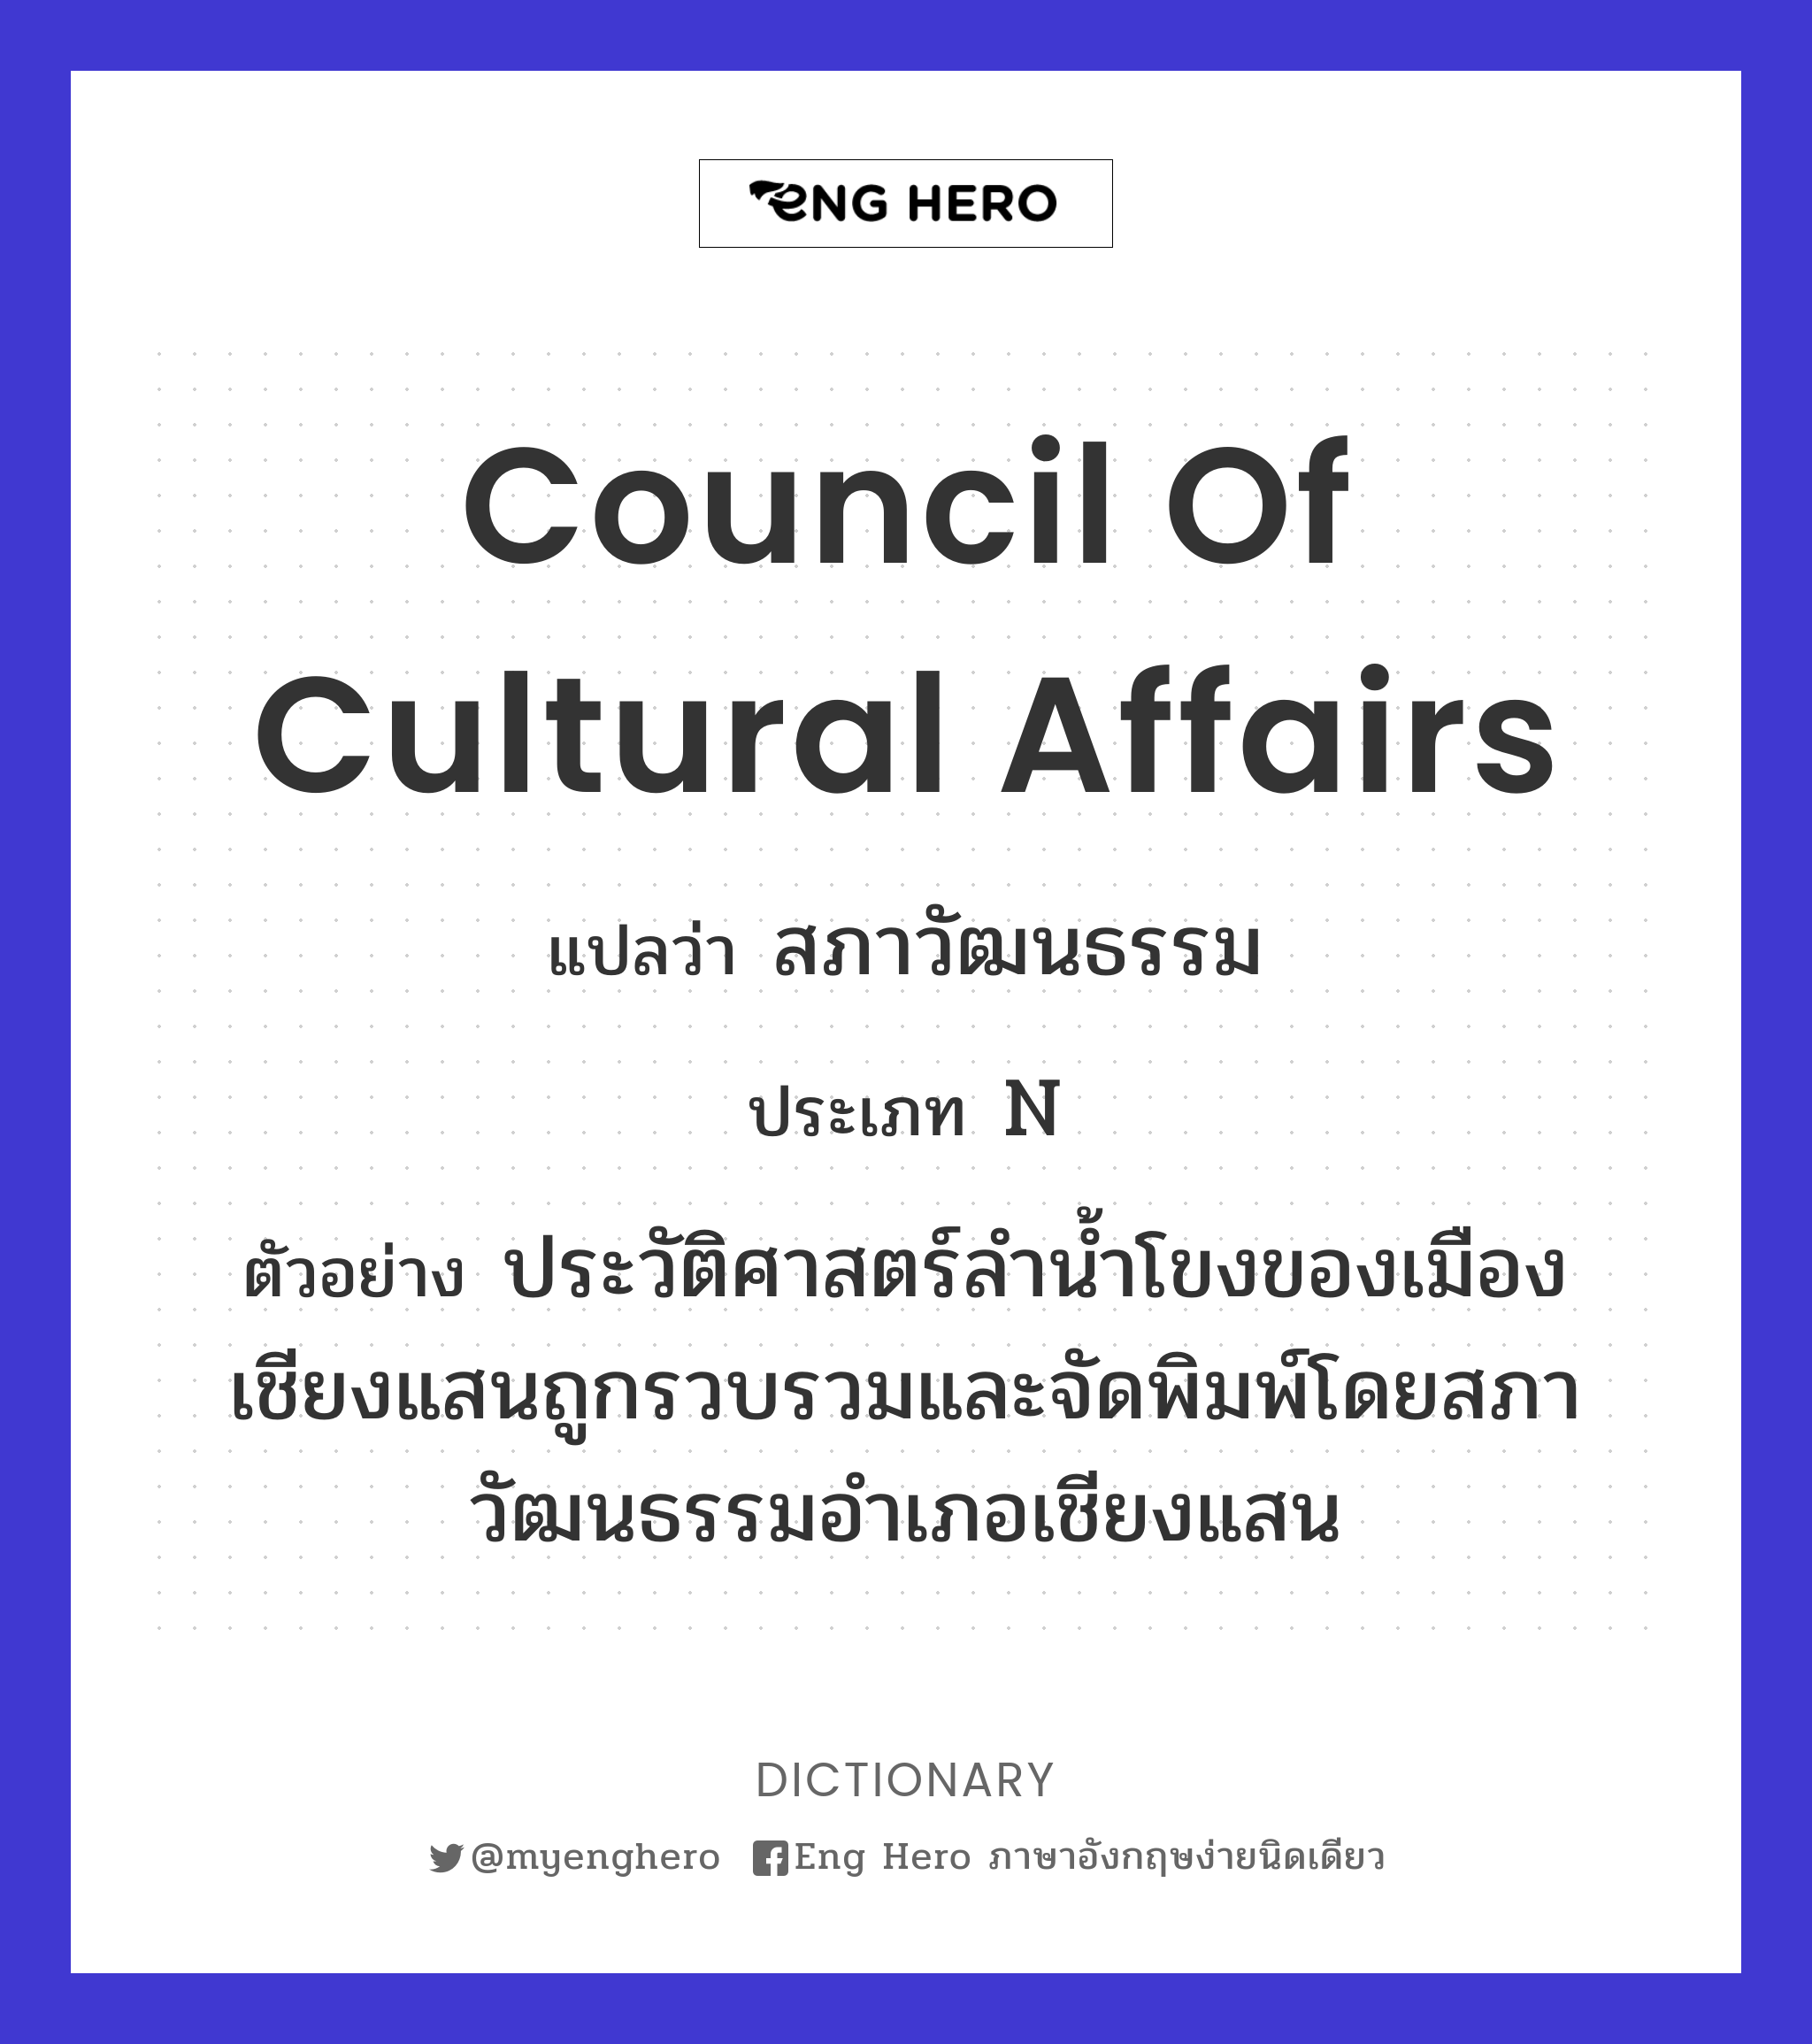 Council of Cultural Affairs